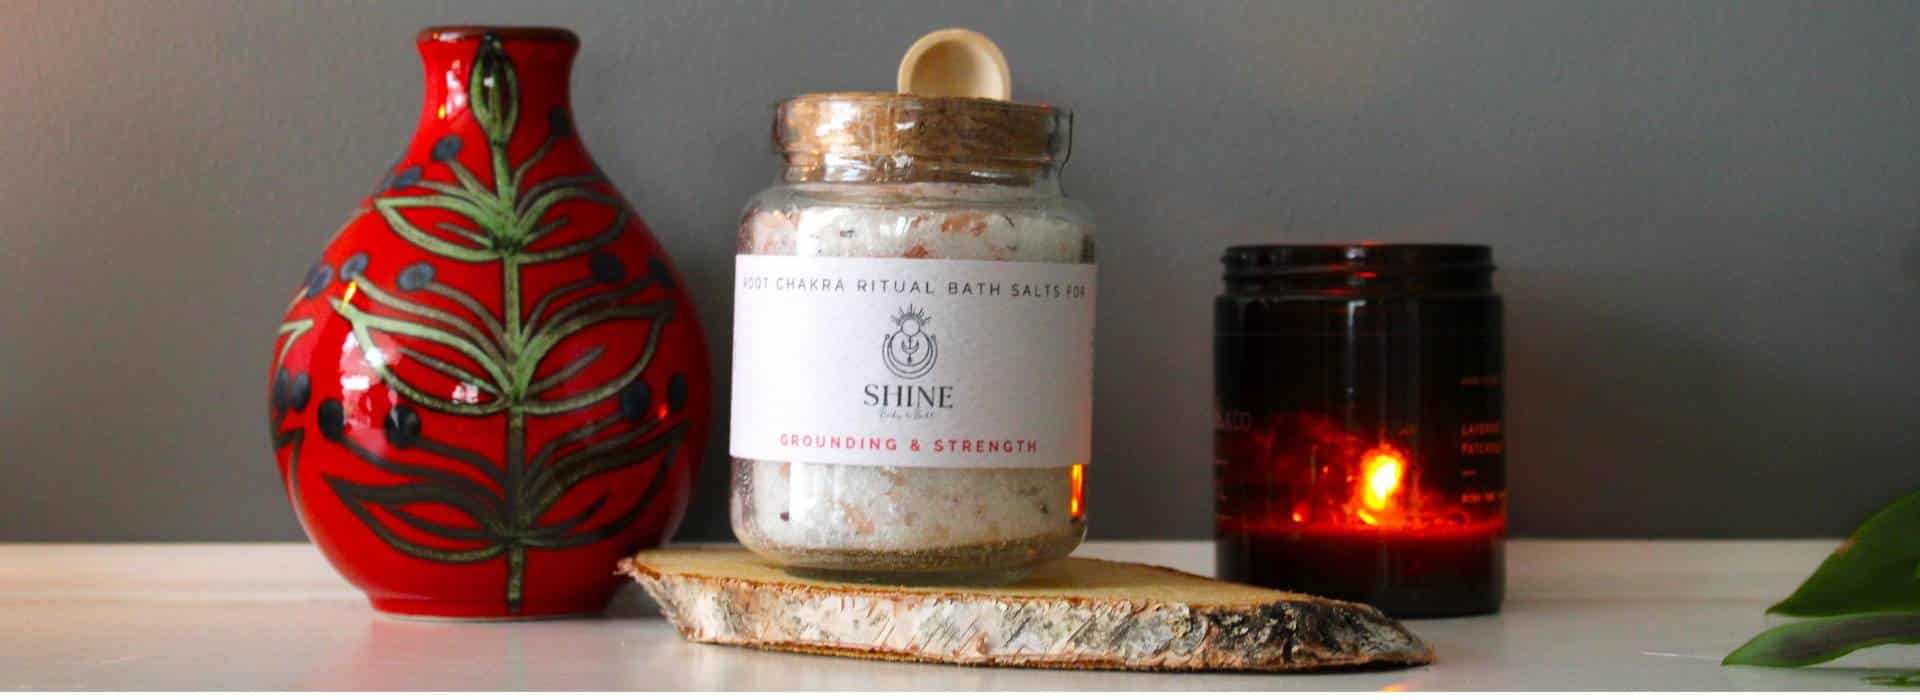 Root Chakra Ritual Bath Salts, vase and candle on shelf | 9 Different Ways to Use Shine Body & Bath Products | Blog